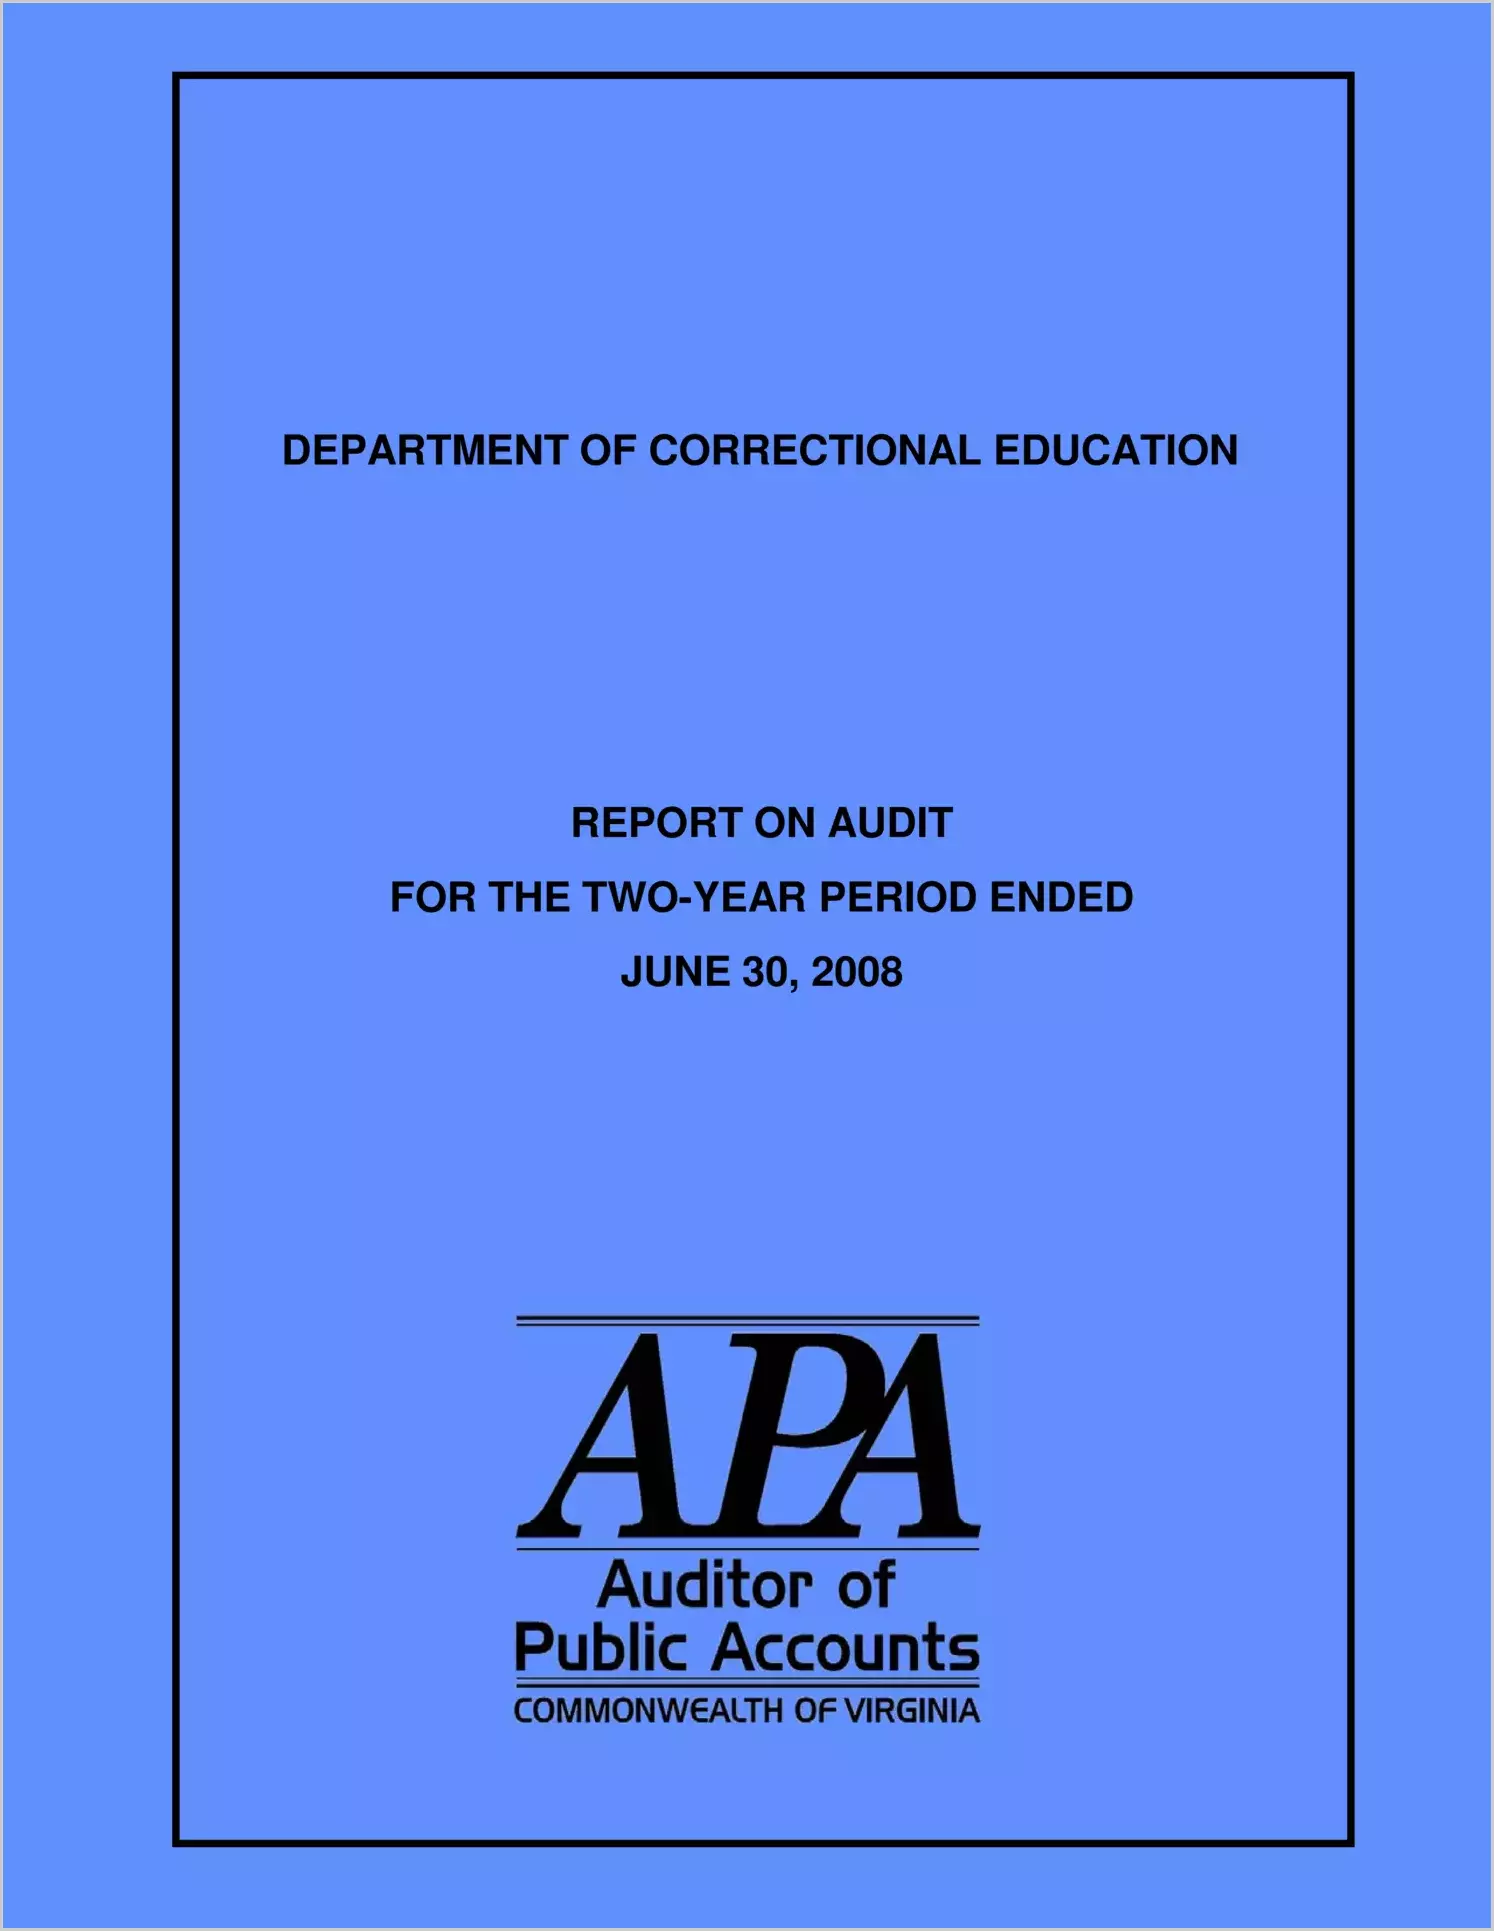 Department of Correctional Education report on audit for the two-year period ended June 30, 2008